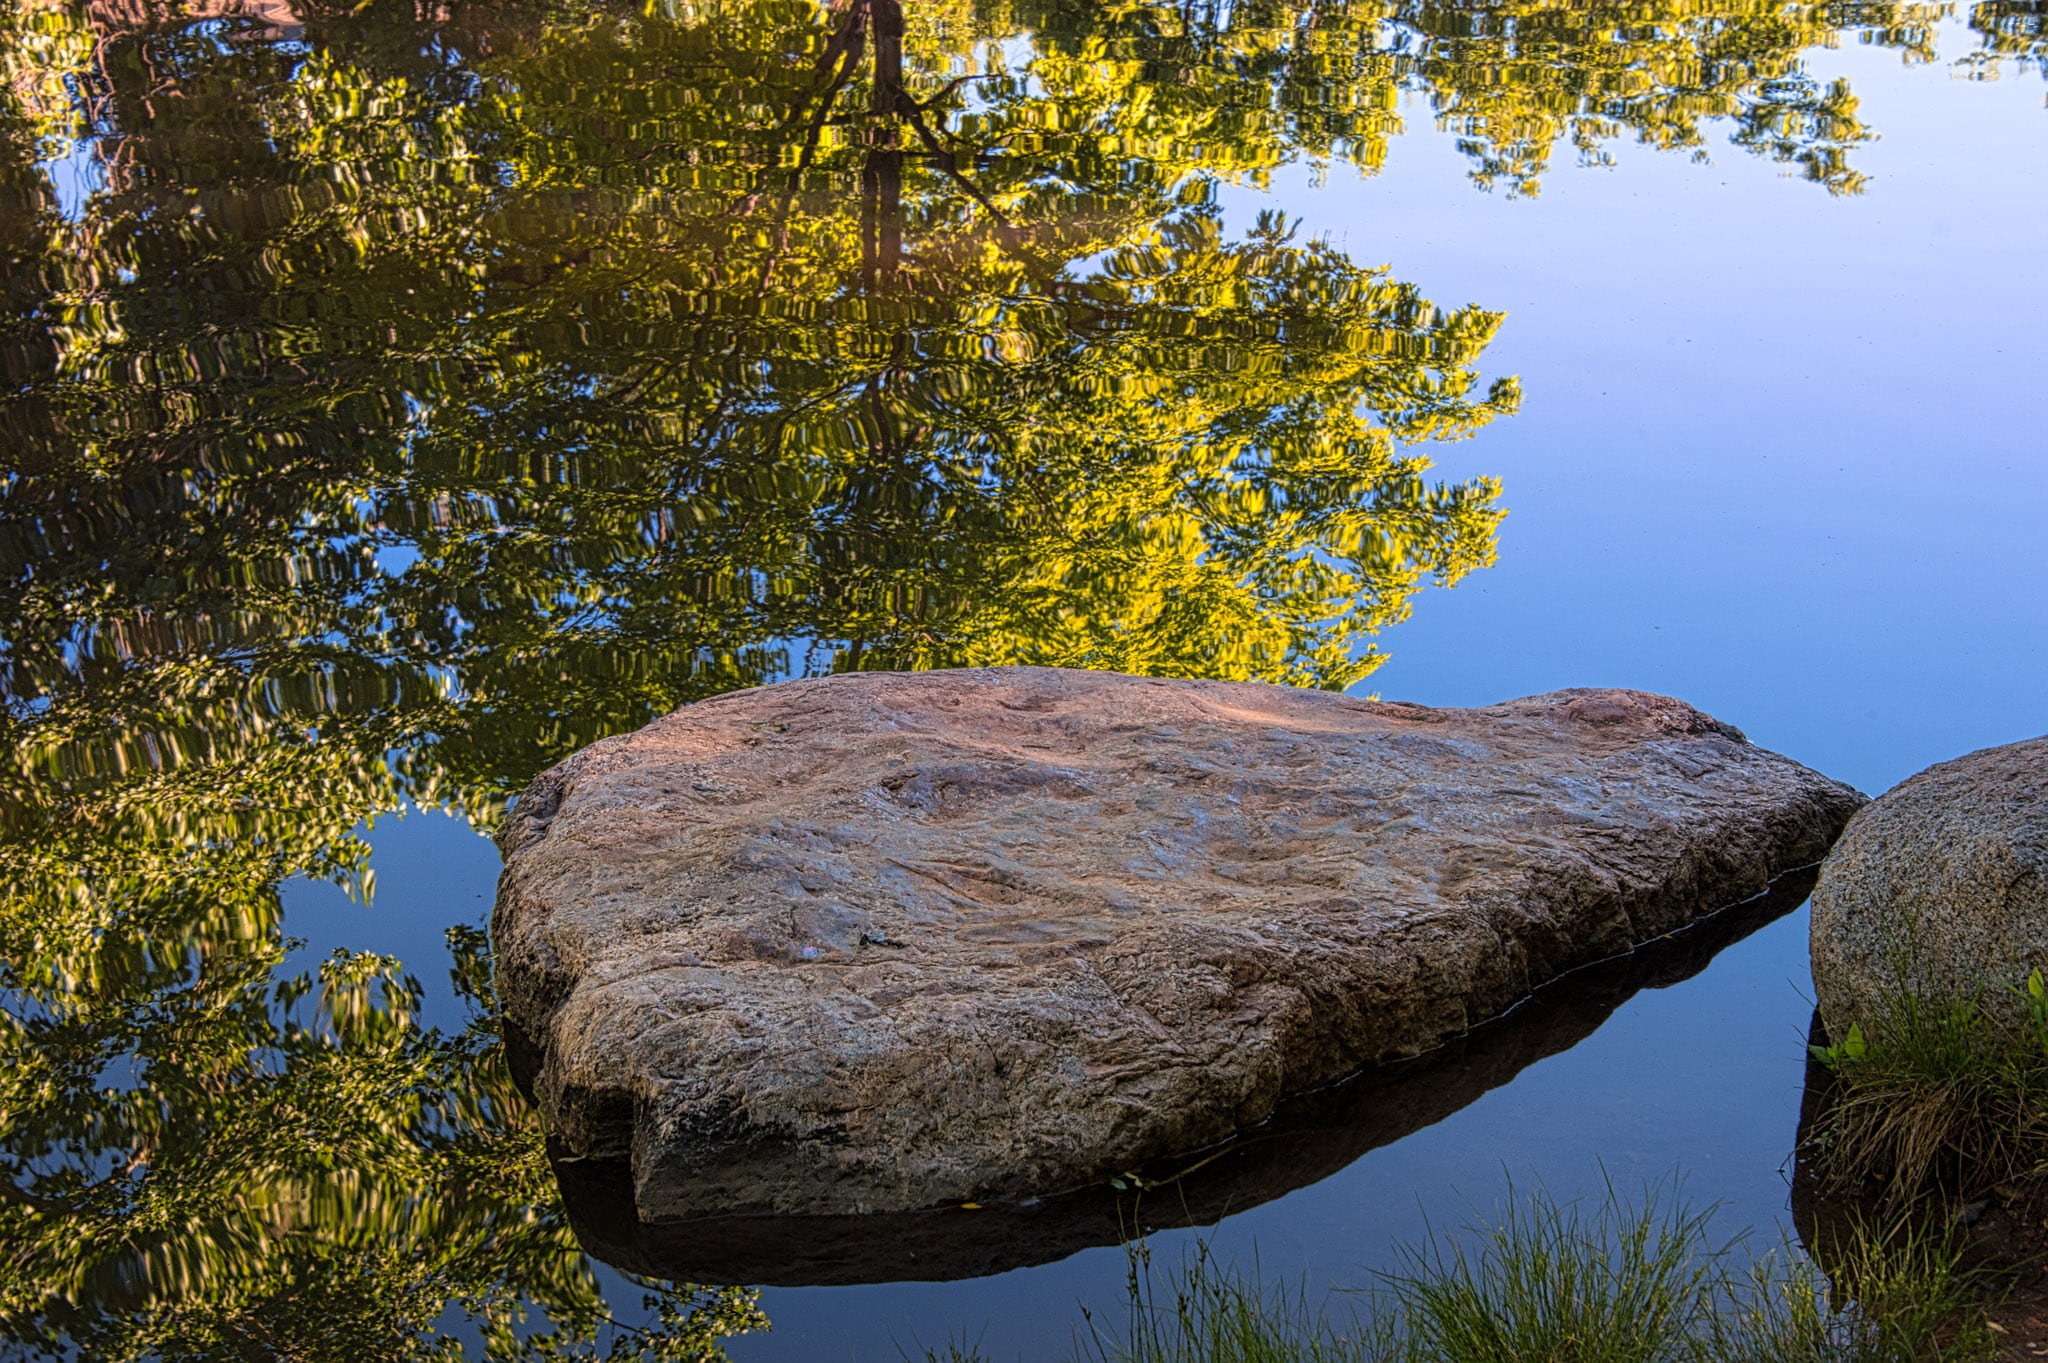 Trees along Boulder Creek are reflected in one of the fish ponds